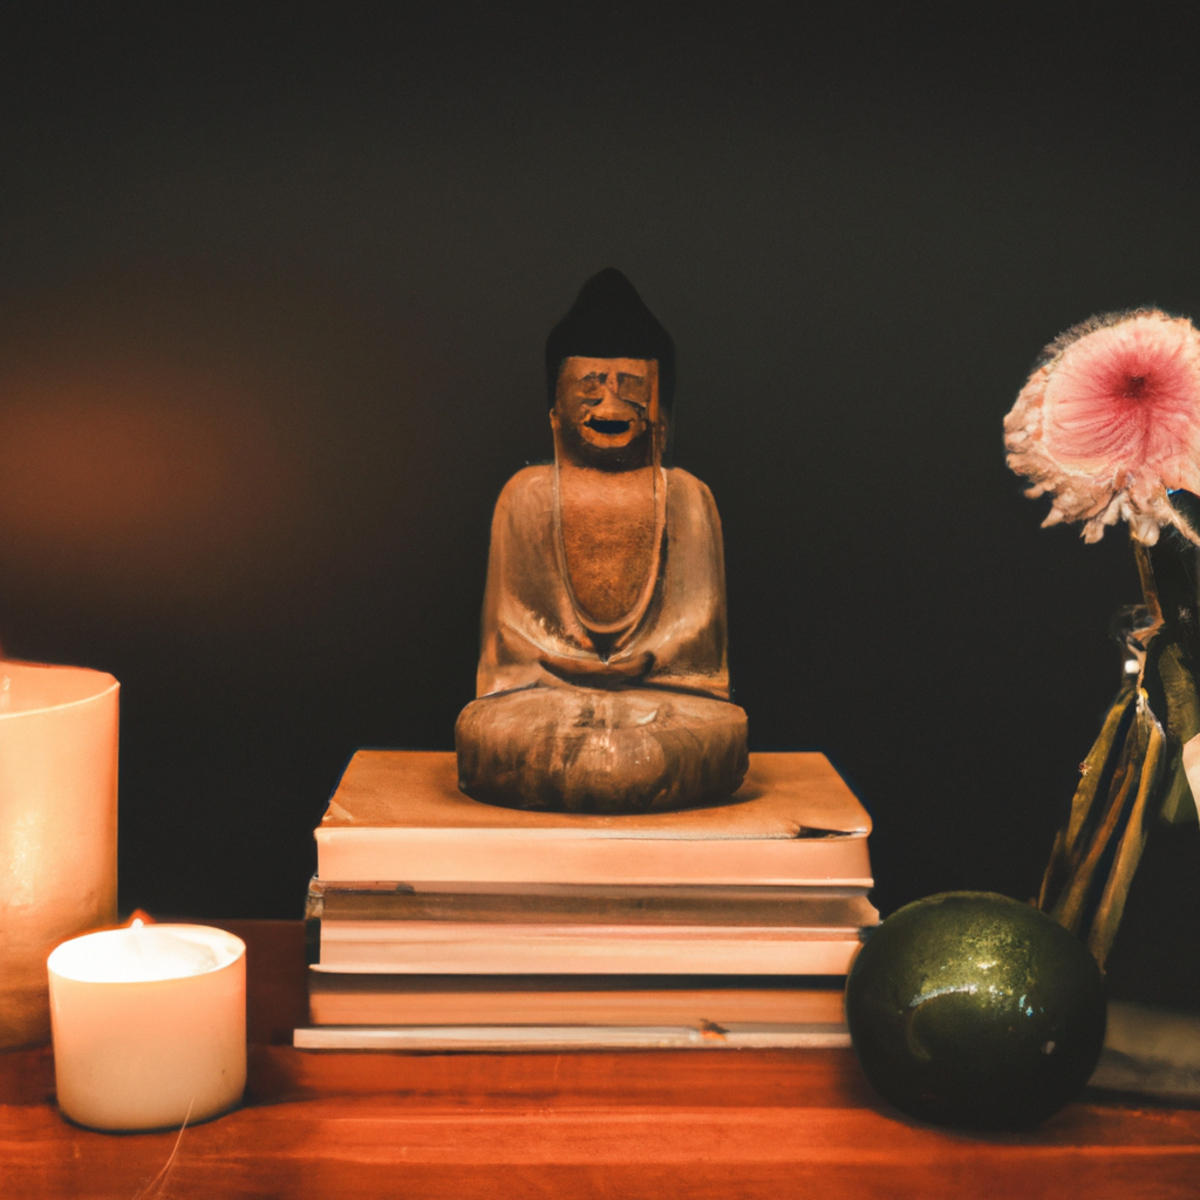 Mindfulness For Stress Reduction - Mindful arrangement of Buddha statue, flowers, books, and candle on wooden table invites reflection.